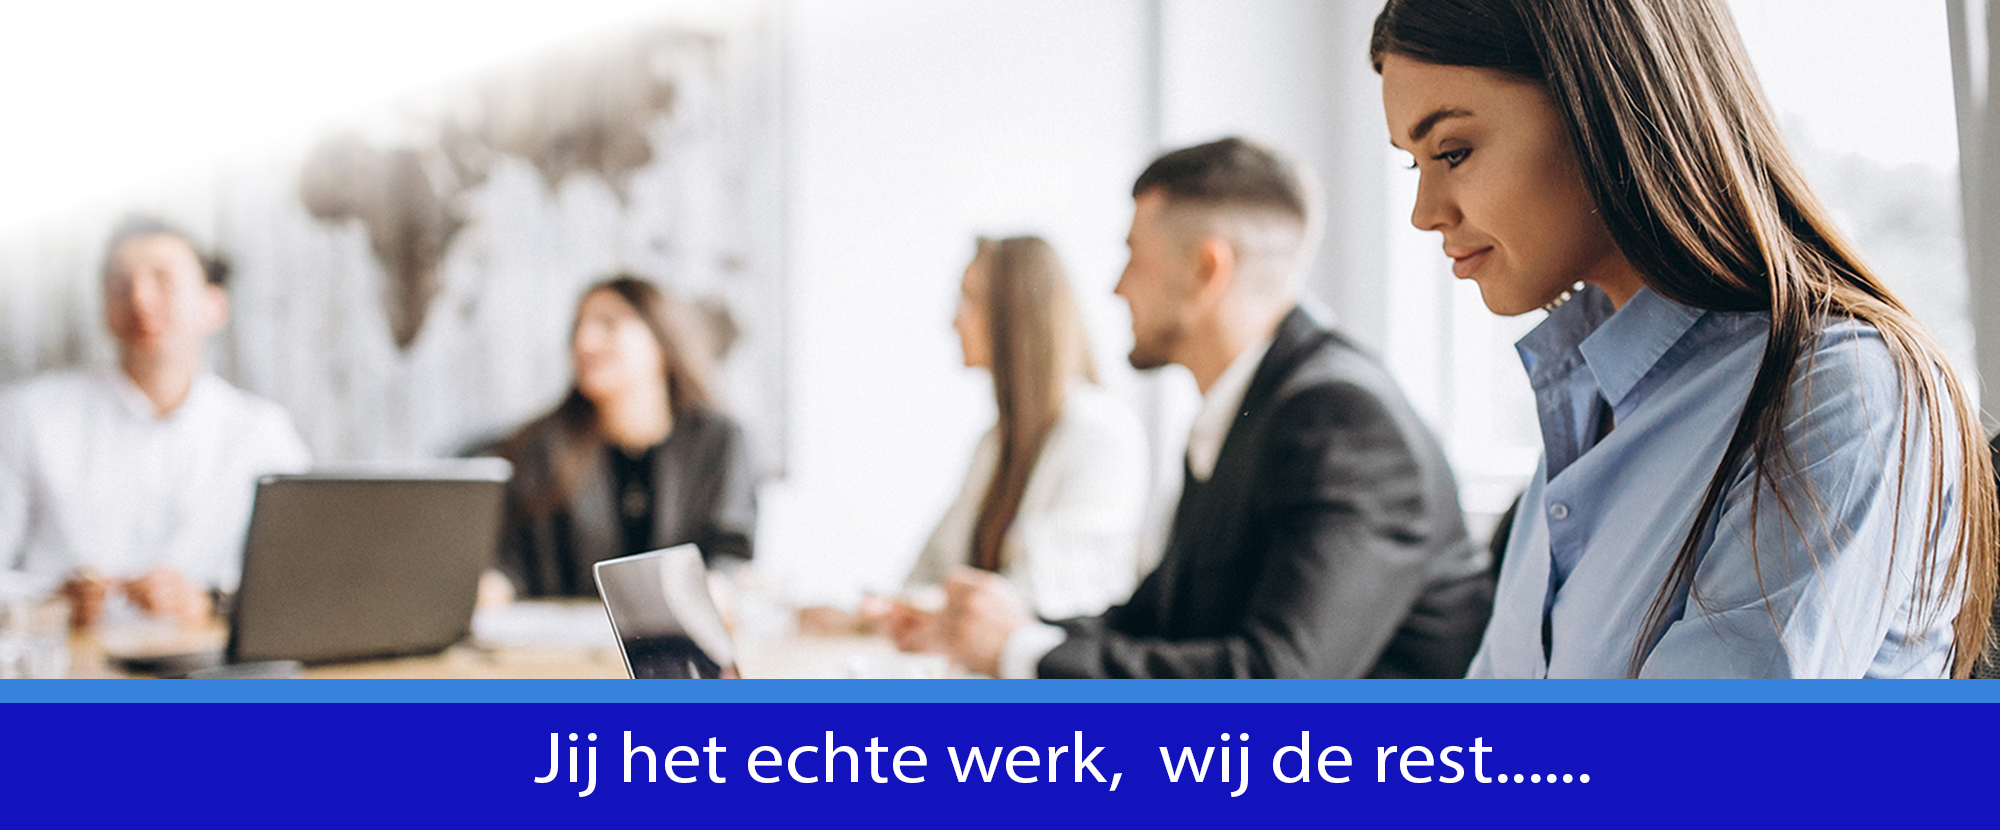 SupportS Recruitment ondersteuning